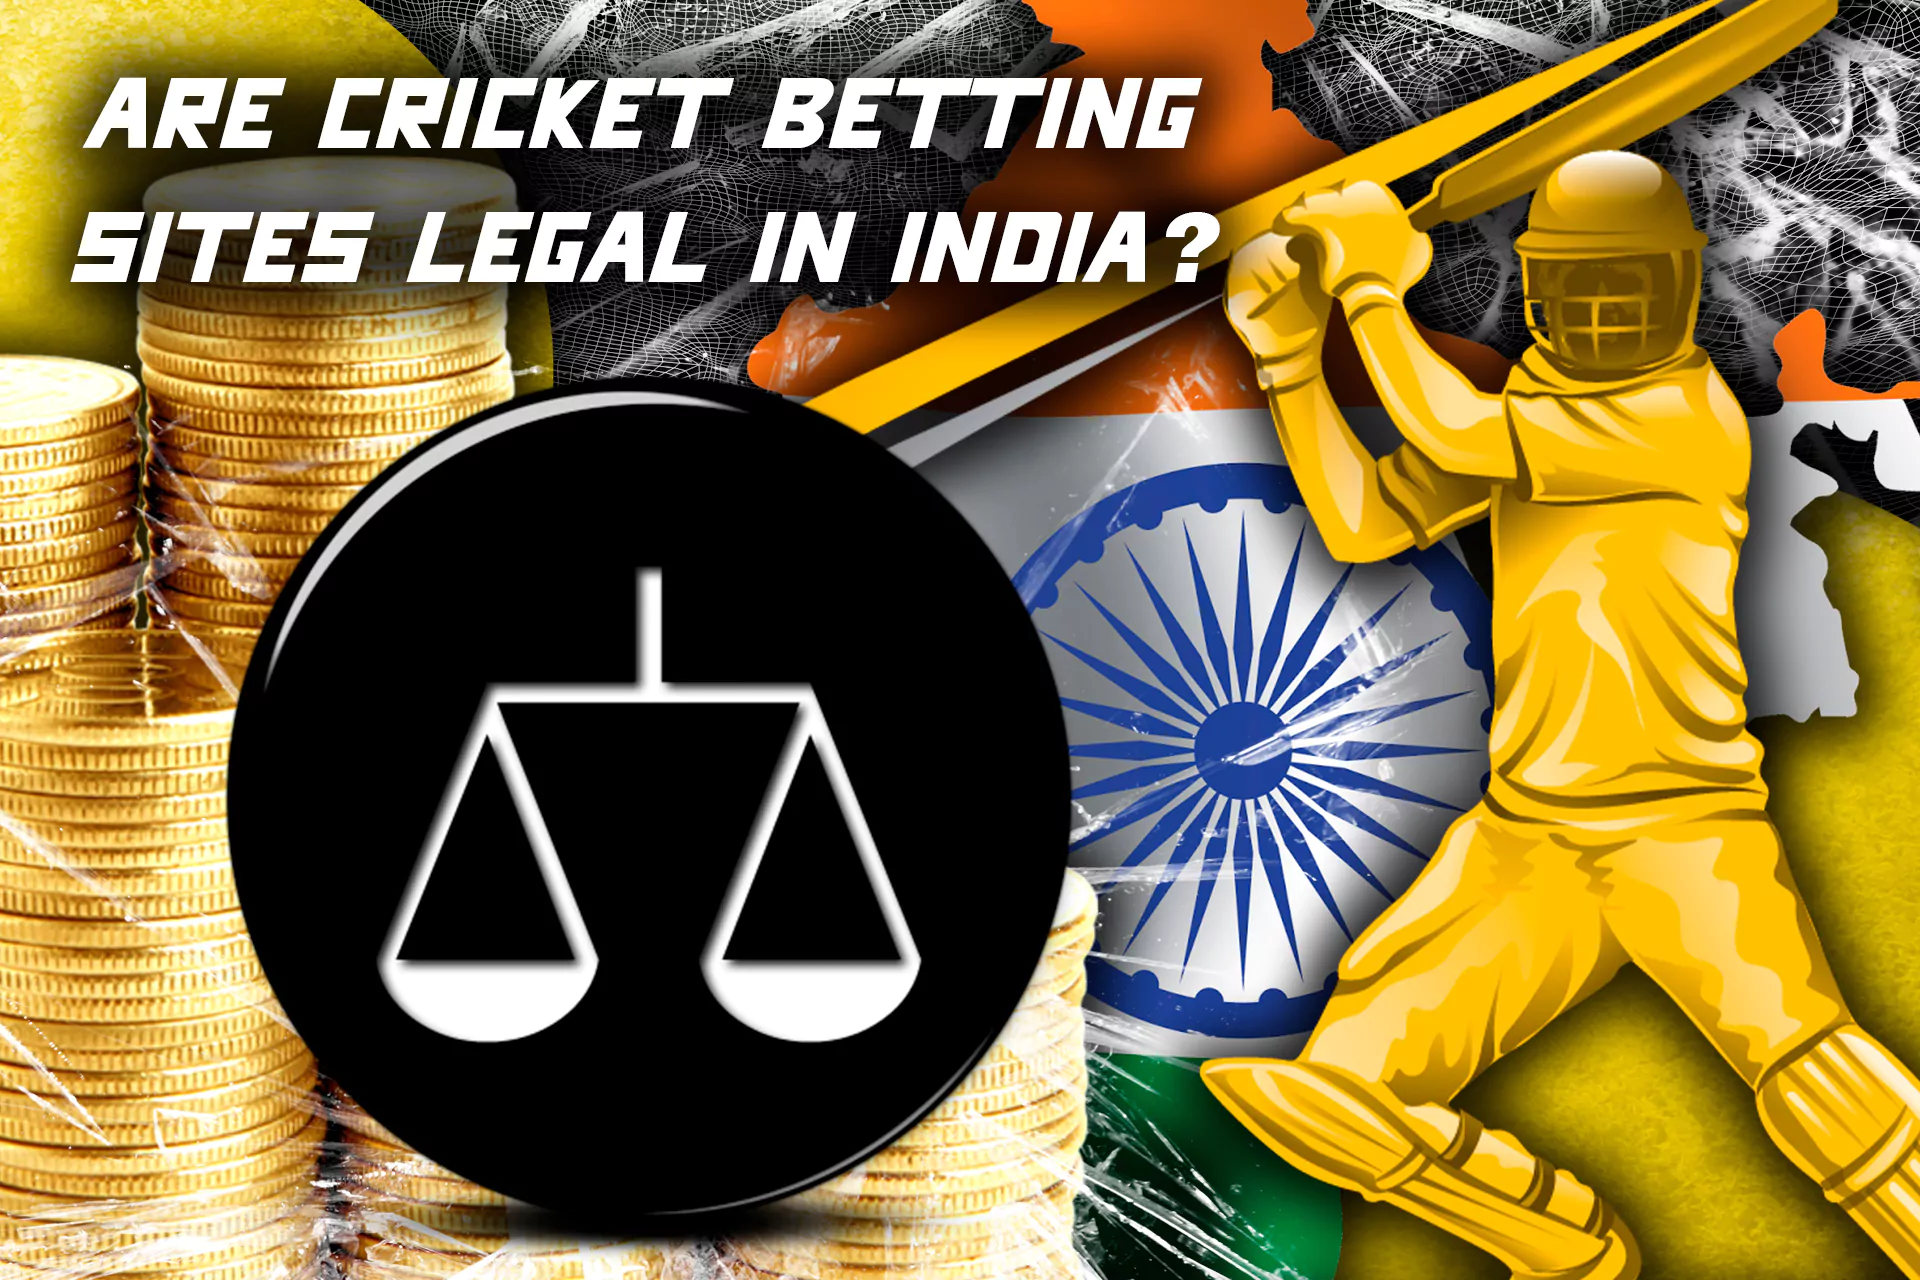 The boundaries of Indian betting law in India are quite blurred. However, there is no law expressly prohibiting betting on cricket. Especially if you place your bets online.